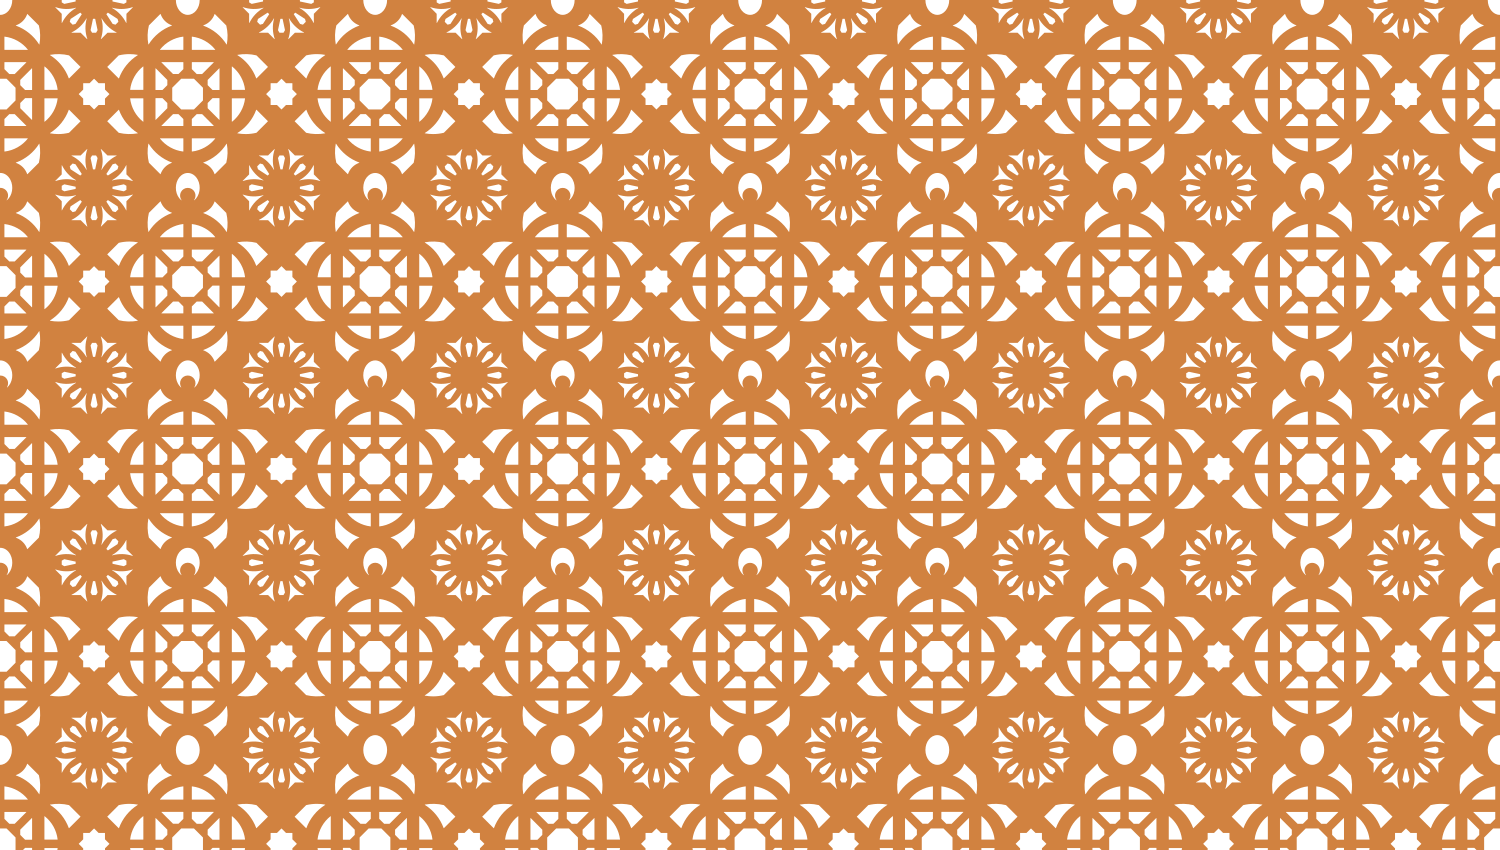 Parasoleil™ Casablanca© pattern displayed with a ochre color overlay